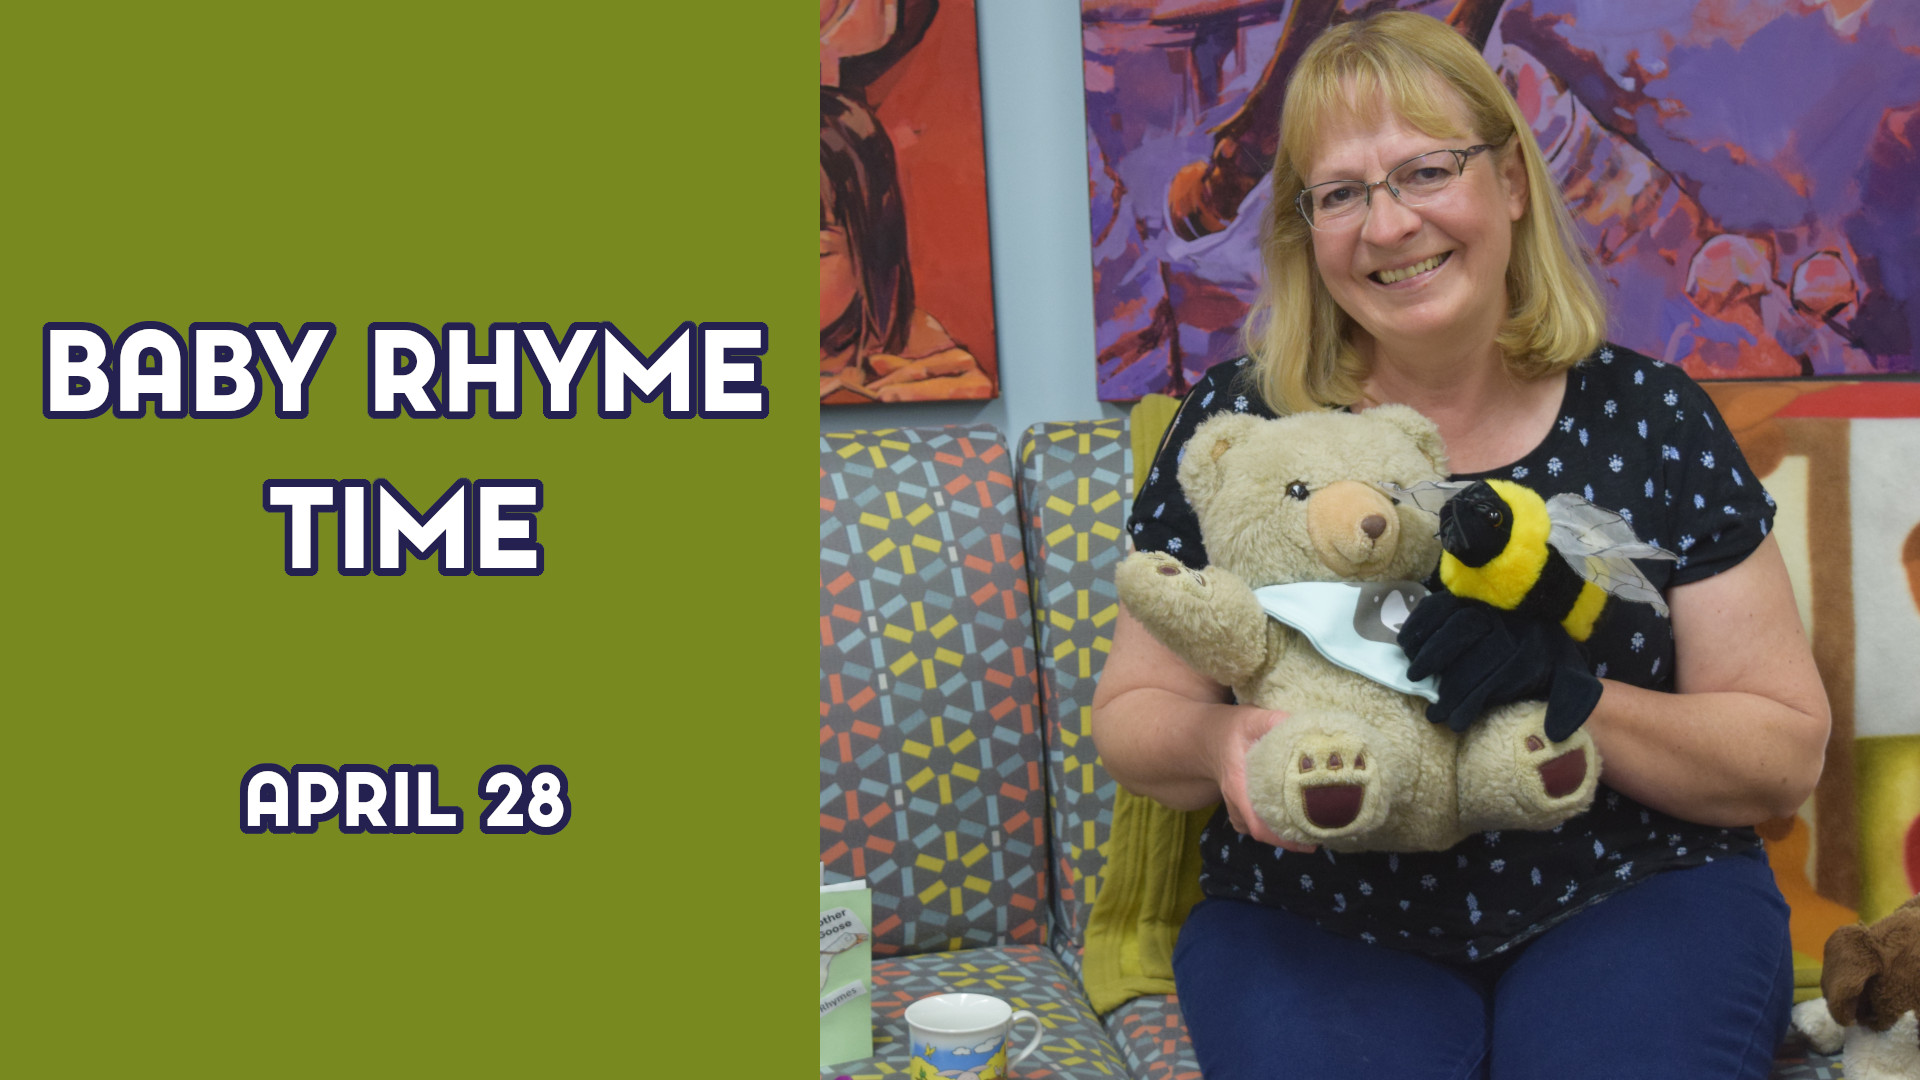 A woman holds stuffed animals next to the text "Baby Rhyme Time April 28"